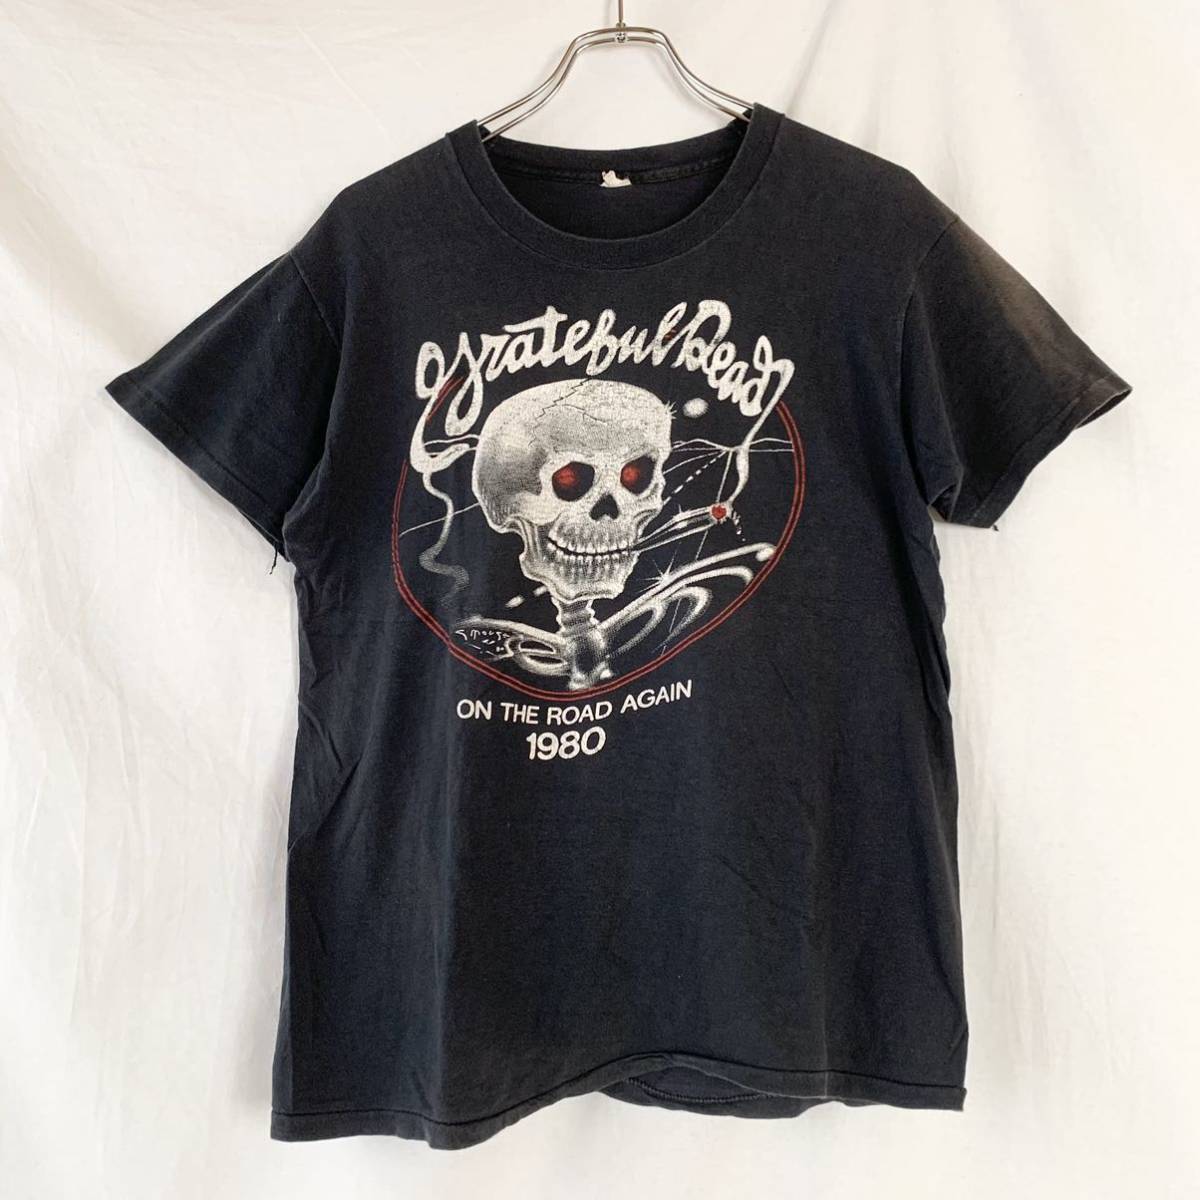 80s USA製 グレイトフル・デッド 1981 Grateful Dead On The Road Again Tour Tシャツ ブラック 黒 両面プリント ヴィンテージ L 検 ロック